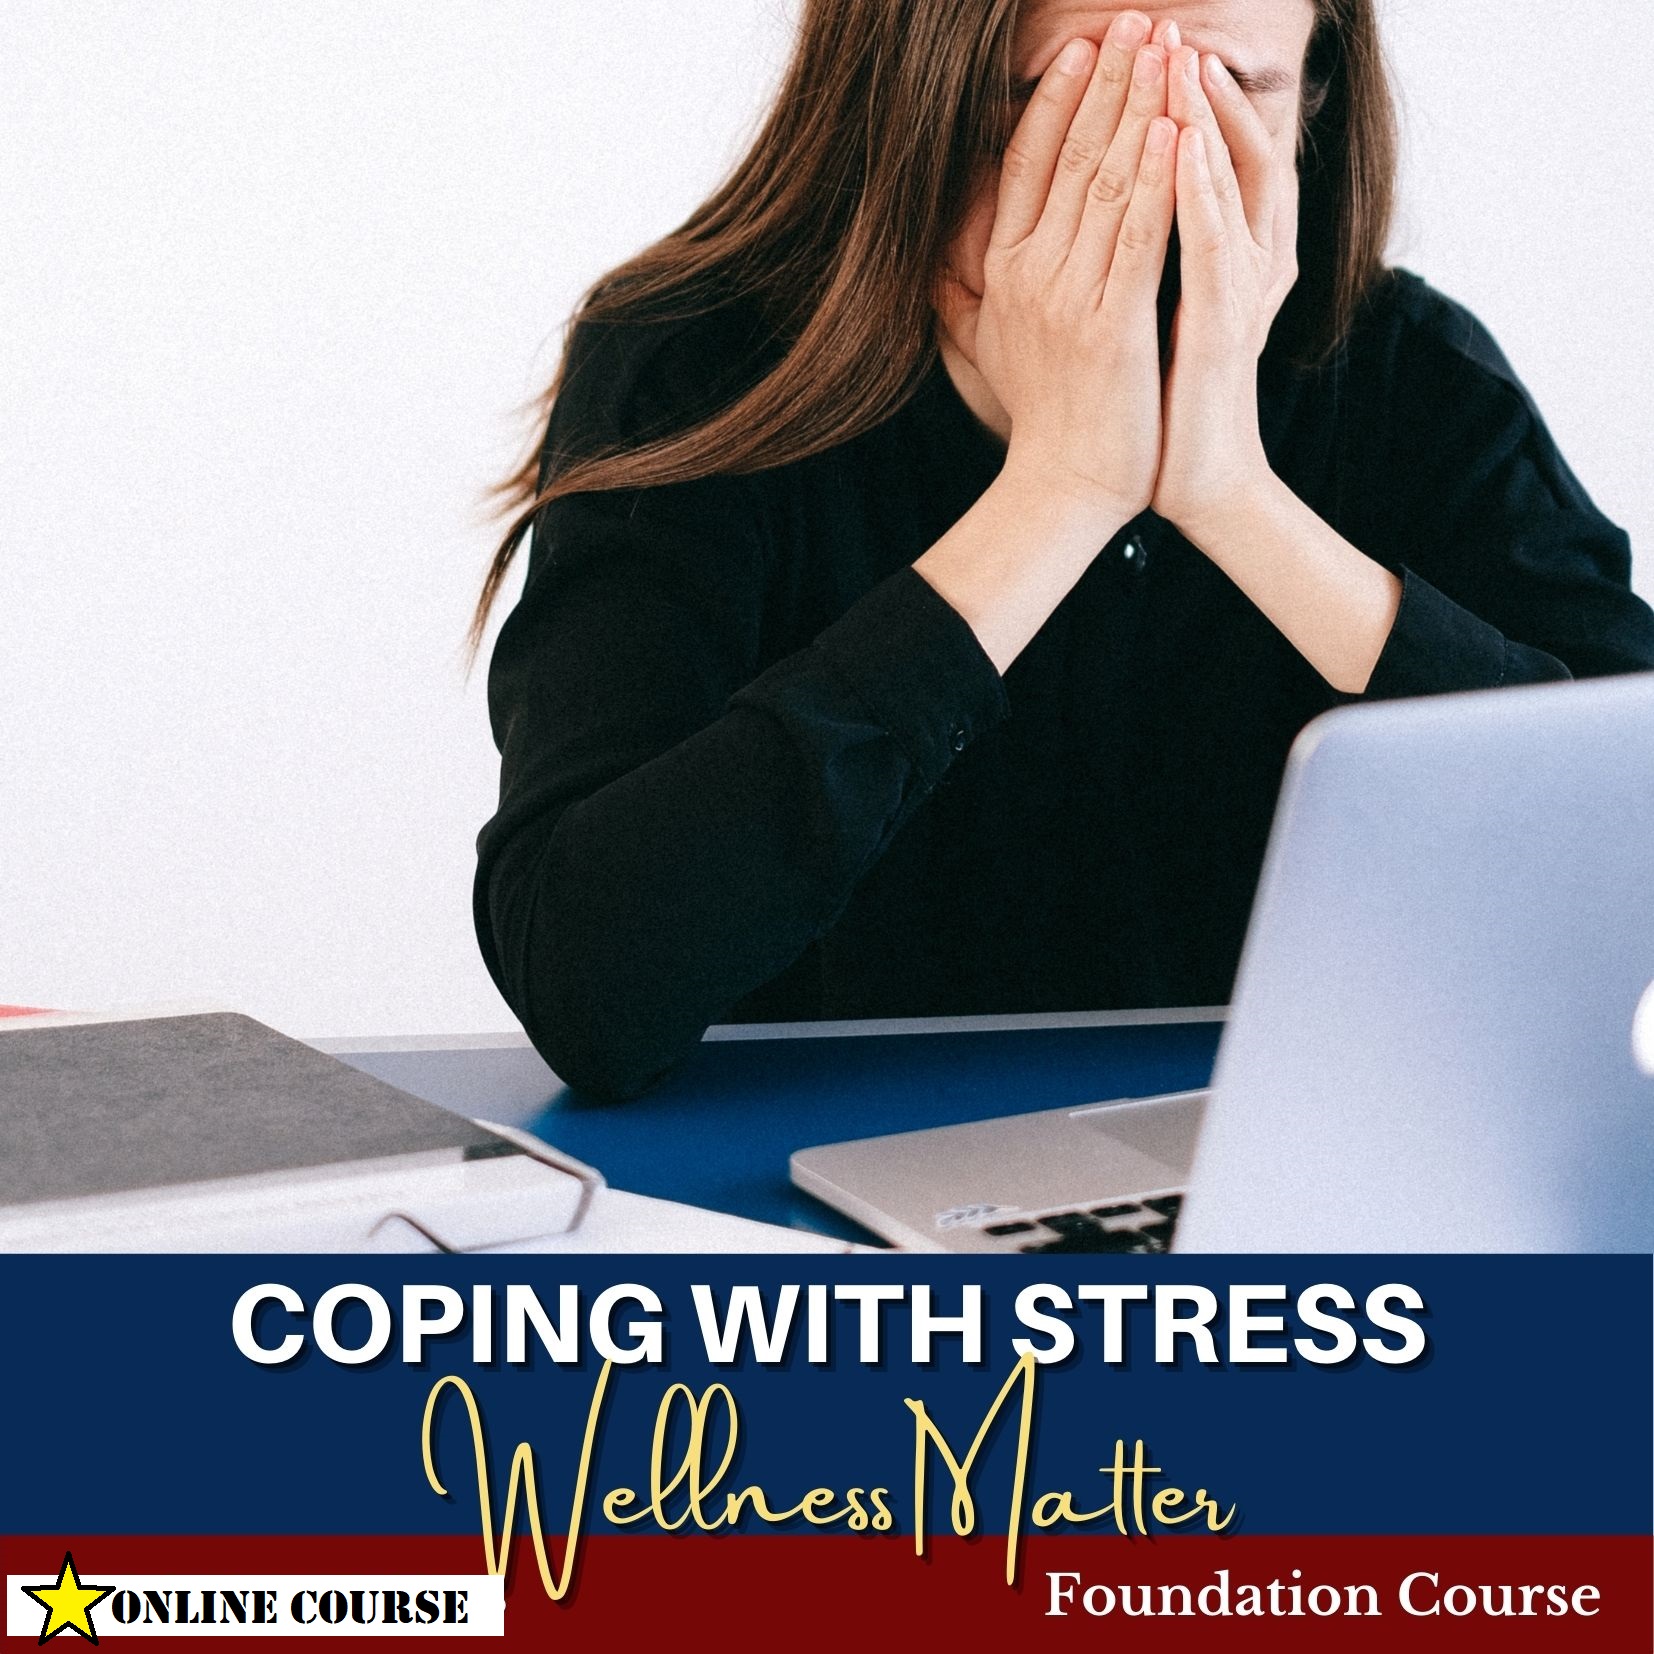 Coping with Stress: Wellness Matter